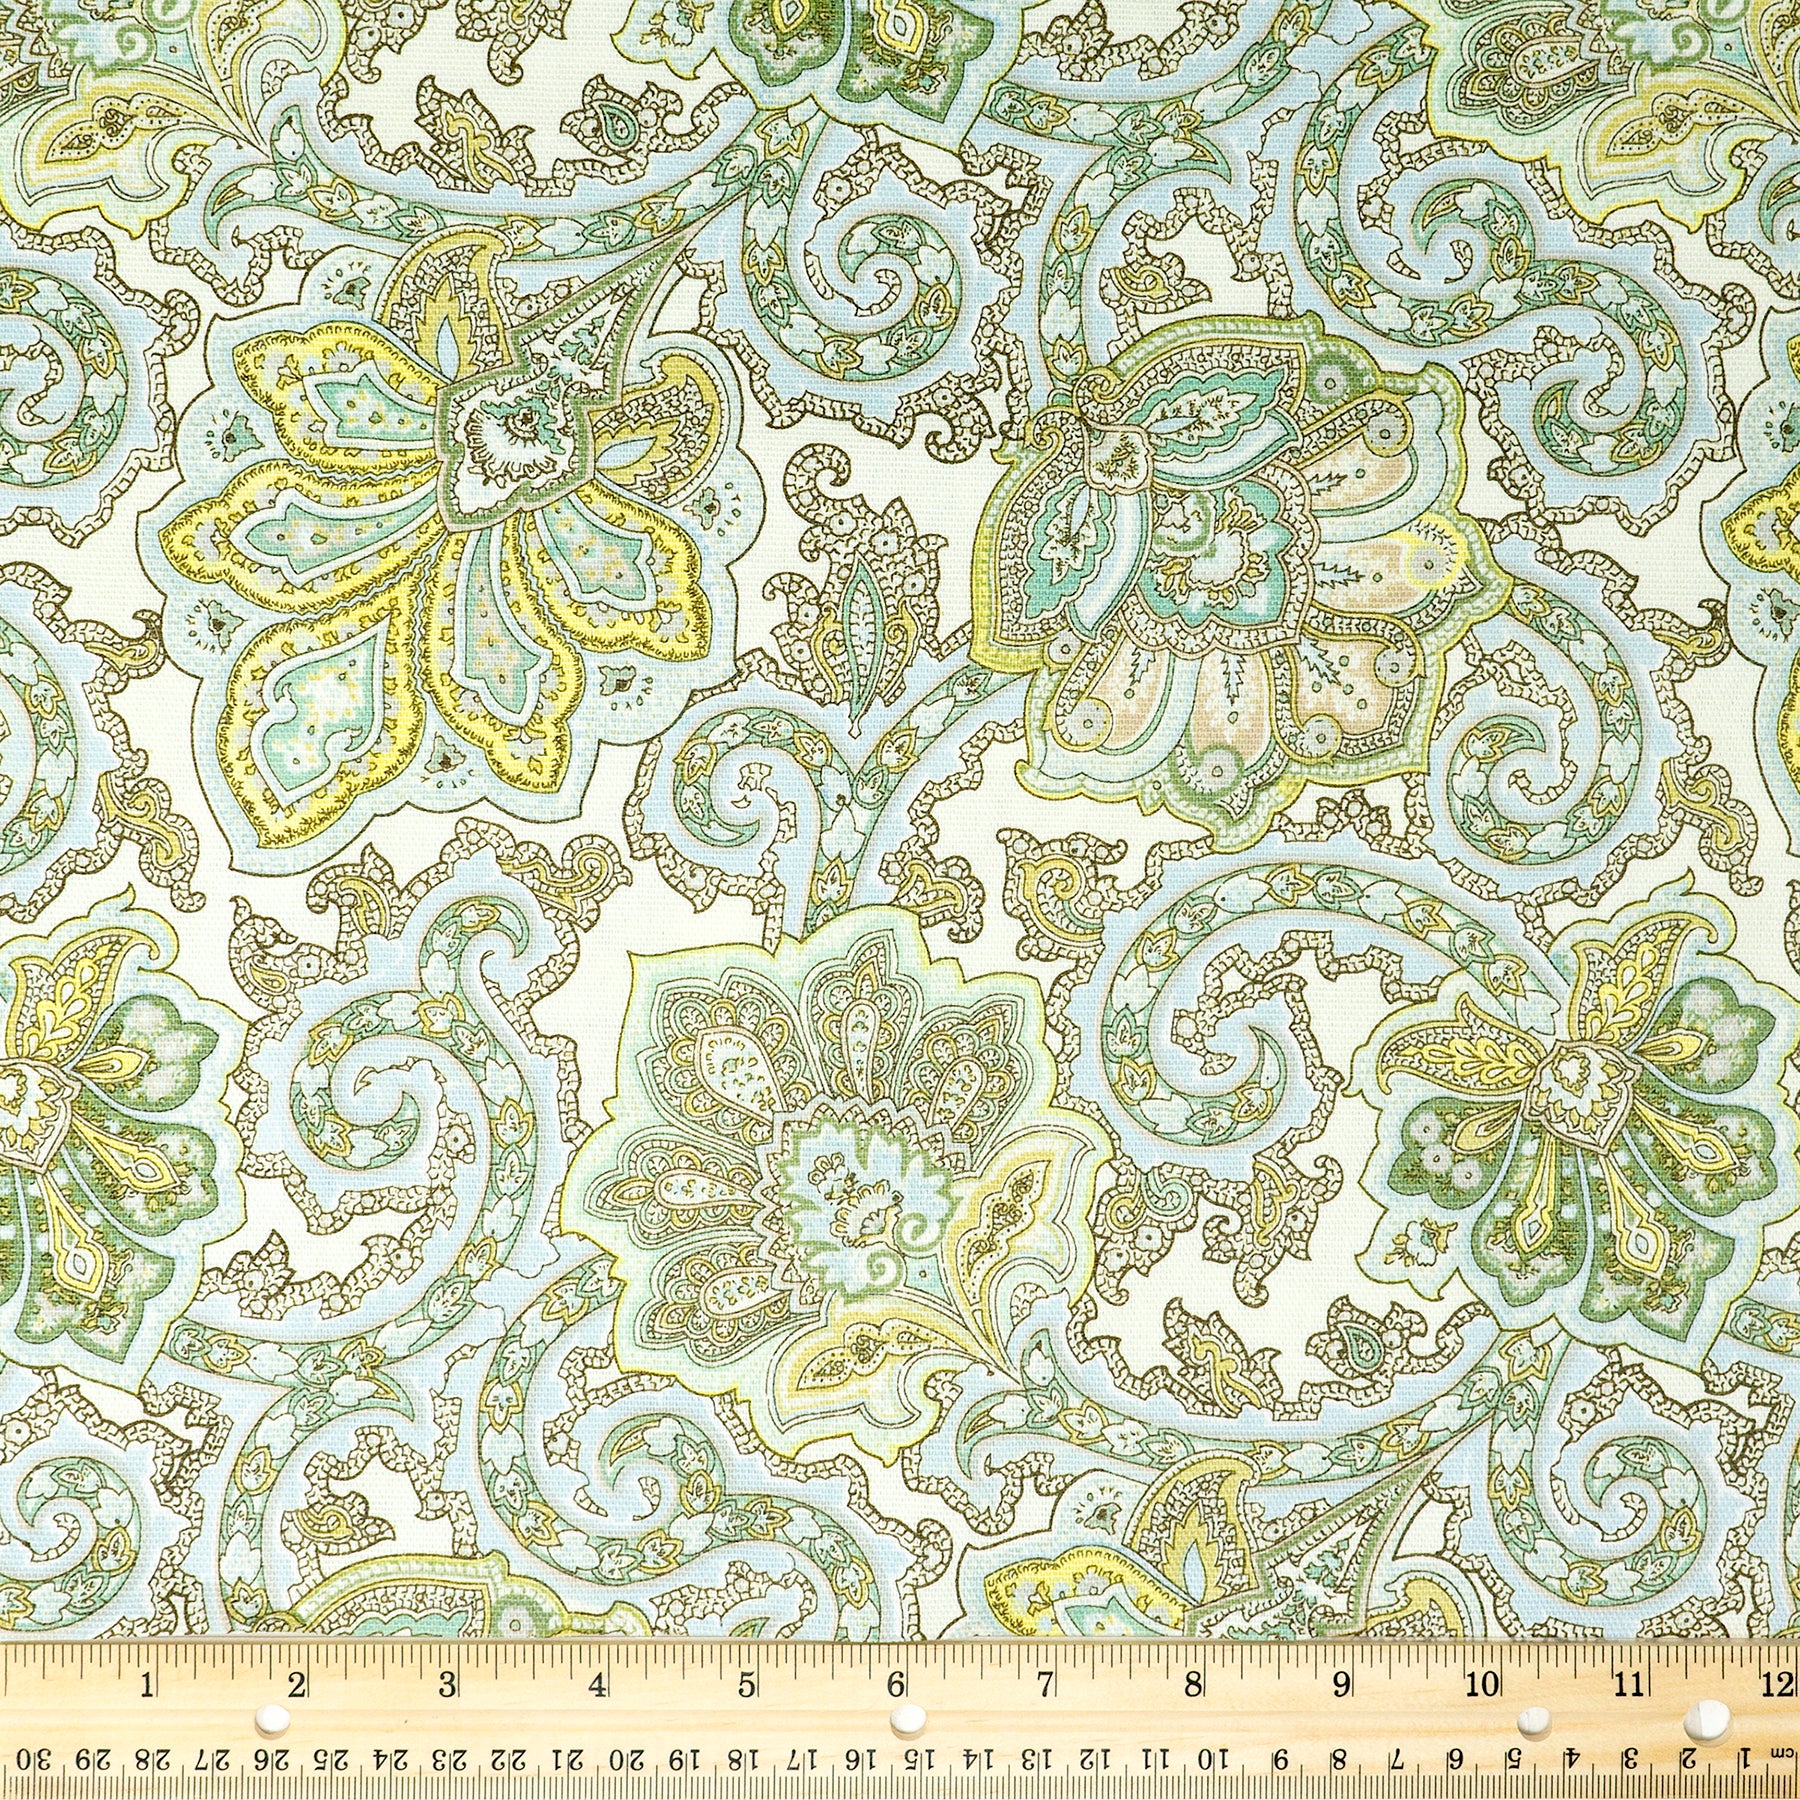 Waverly Inspirations 100% Cotton Duck 45" Width Paisley Spa Color Sewing Fabric by the Yard